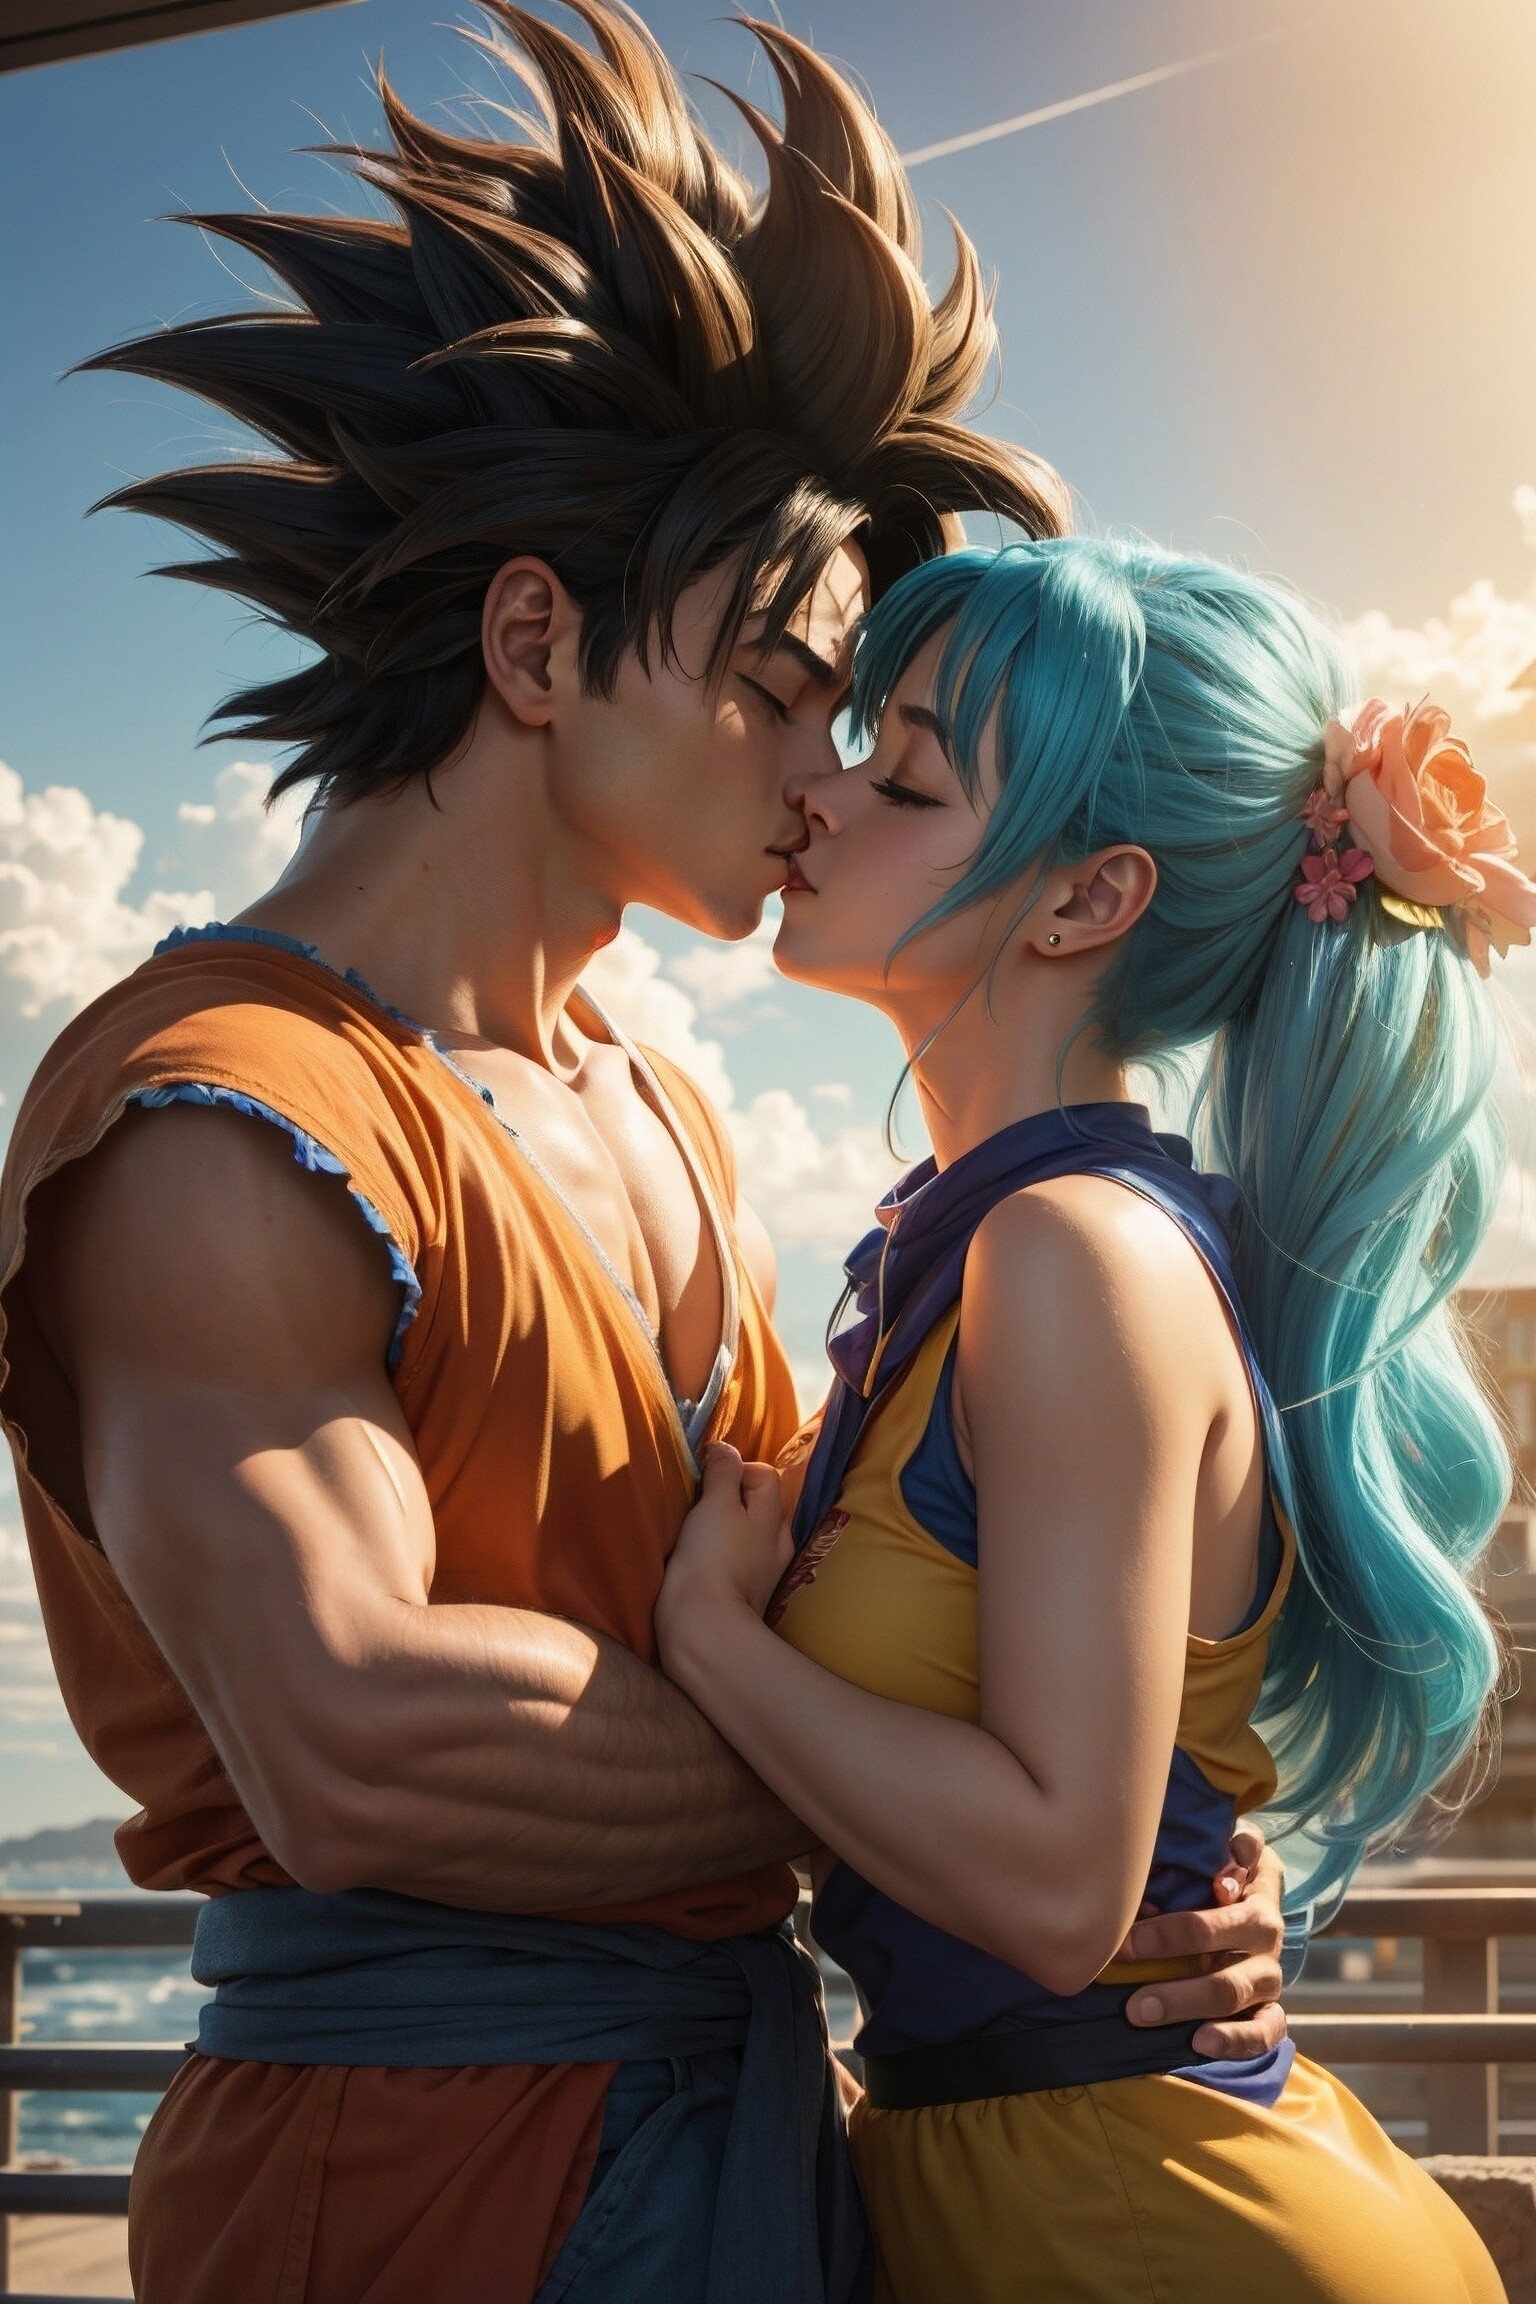 anthony dimaranan recommends Dragon Ball Z Kissing